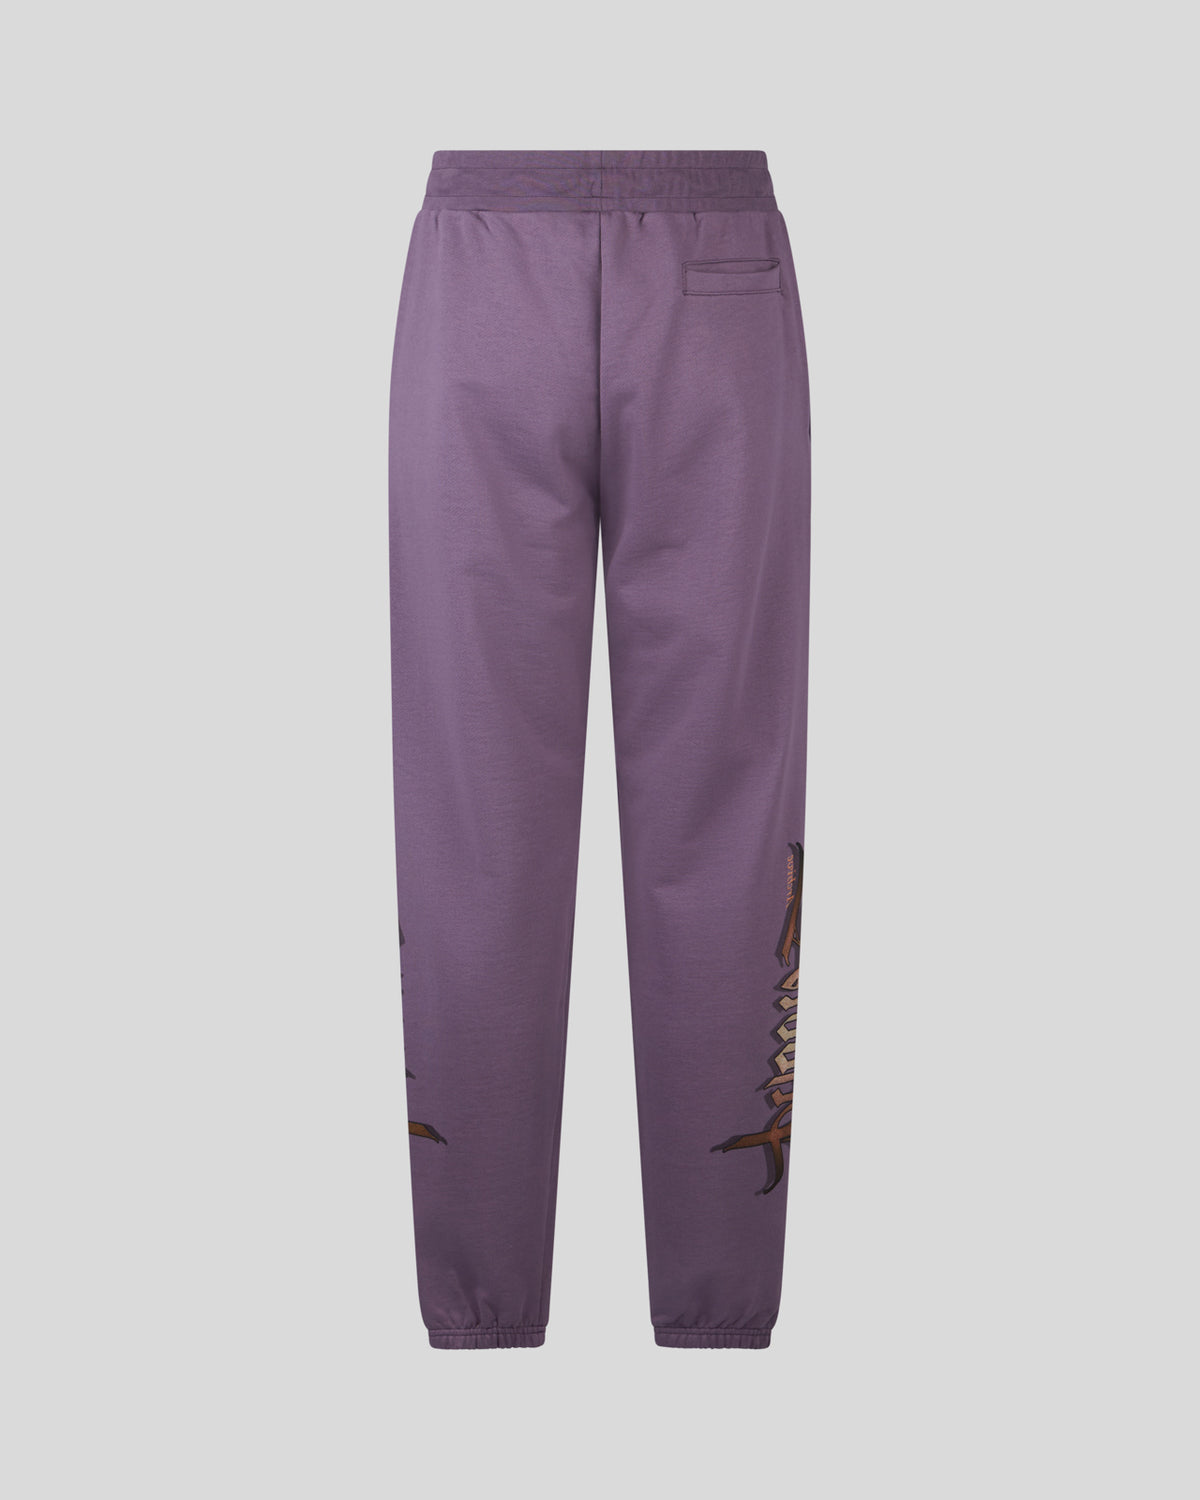 PHOBIA BLUE PANT WITH GOTHIC SH PRINT